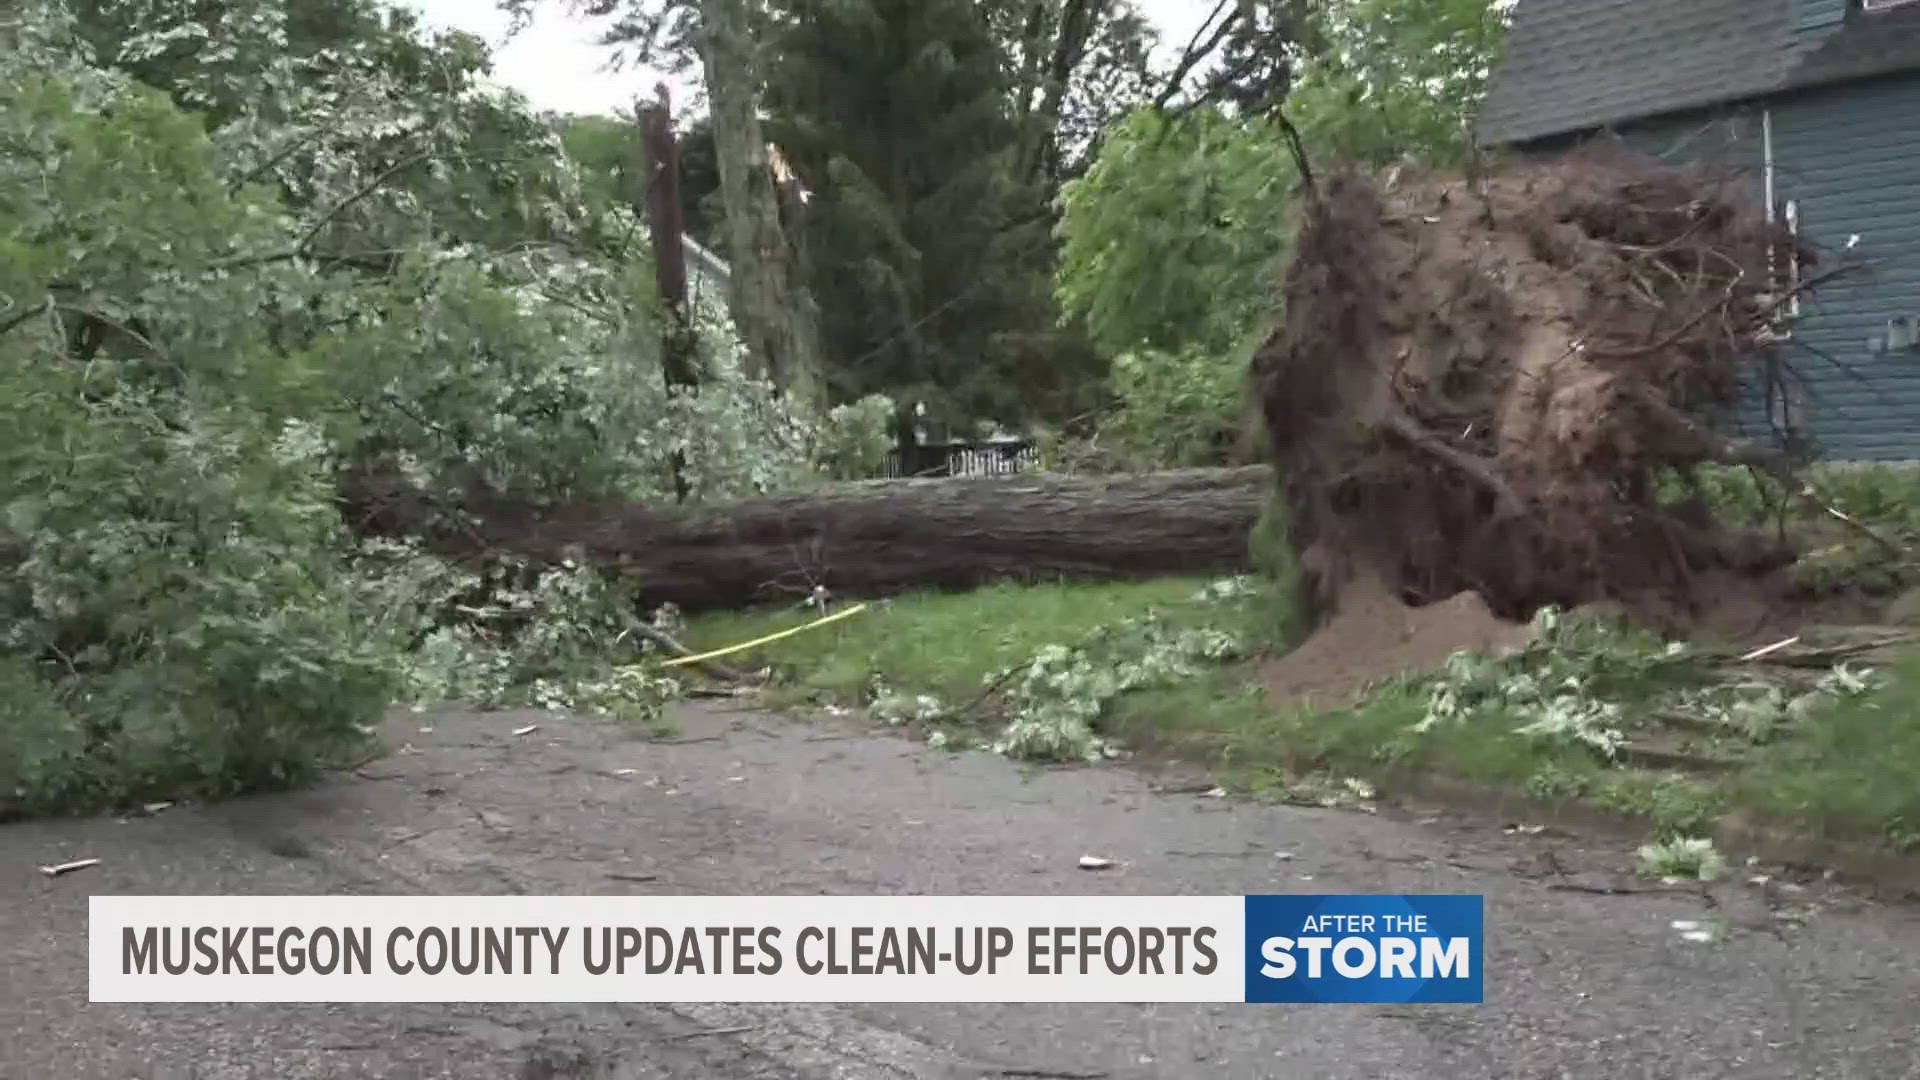 The Muskegon County Emergency Operations Center provided an update on the storm damage around 3:15 p.m. on Tuesday.